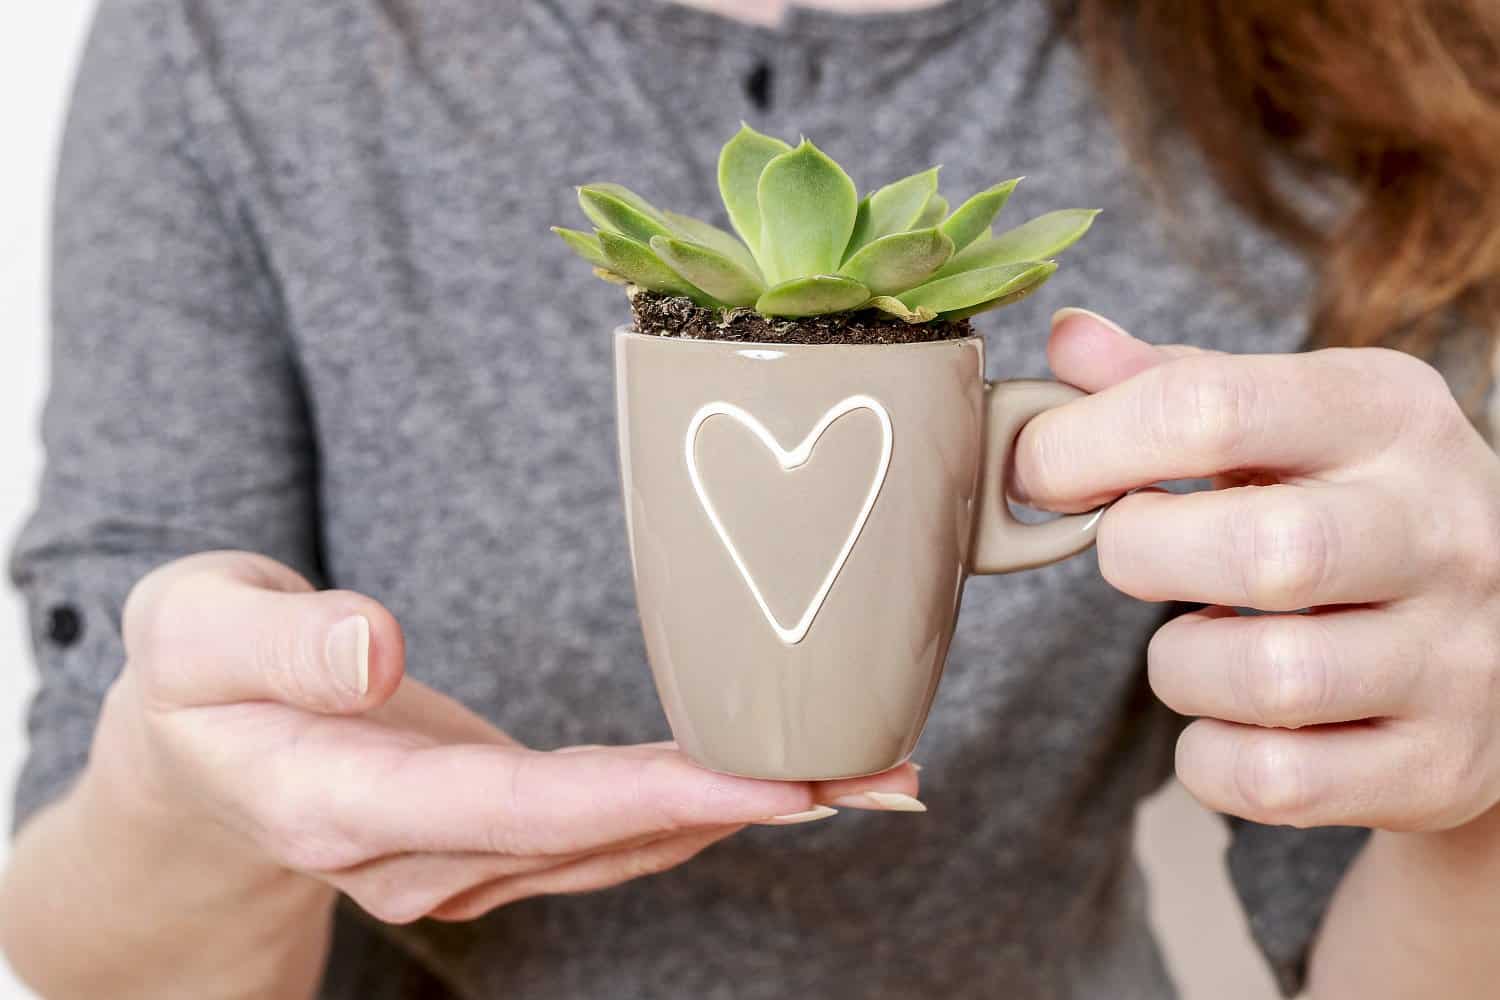 Woman holding a succulent in a mug